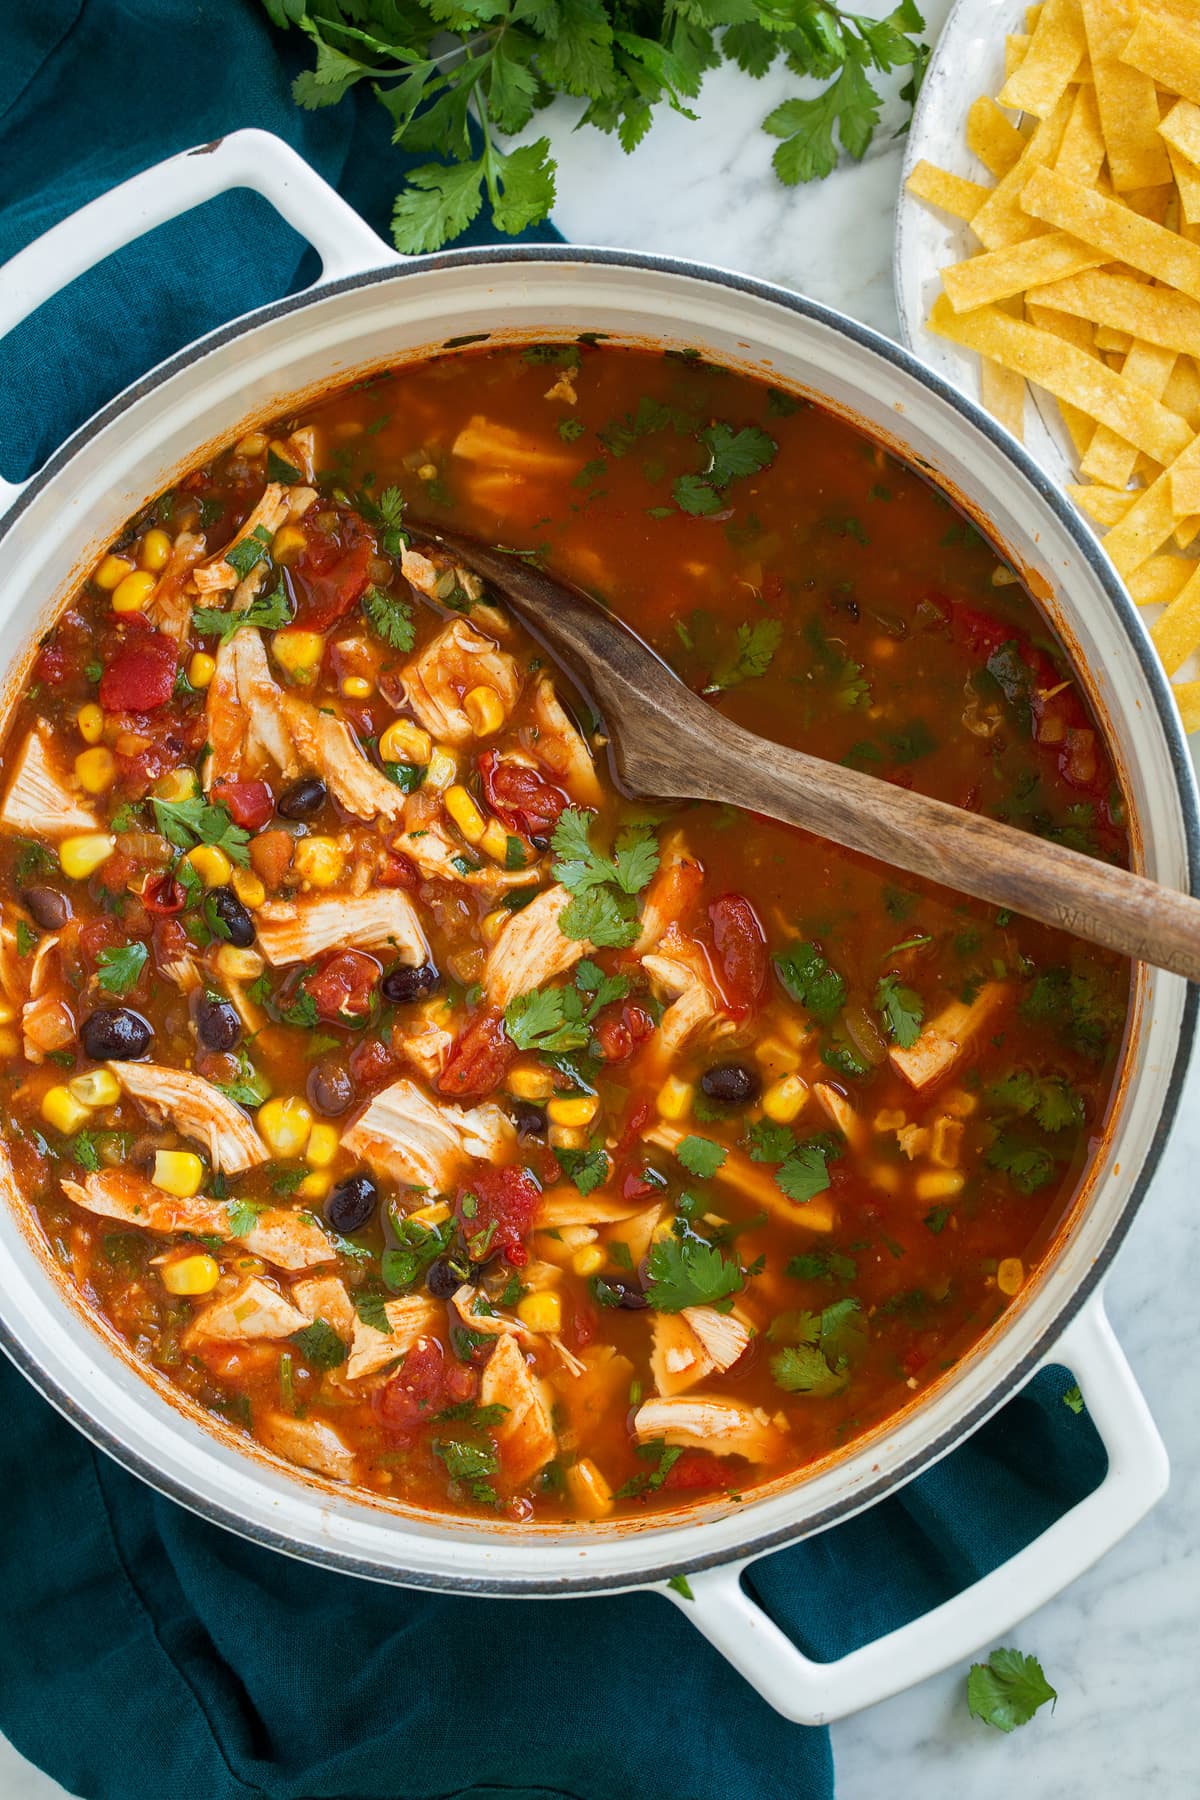 Chicken Tortilla Soup shown overhead in a large white pot, with corn tortilla strips on the side.